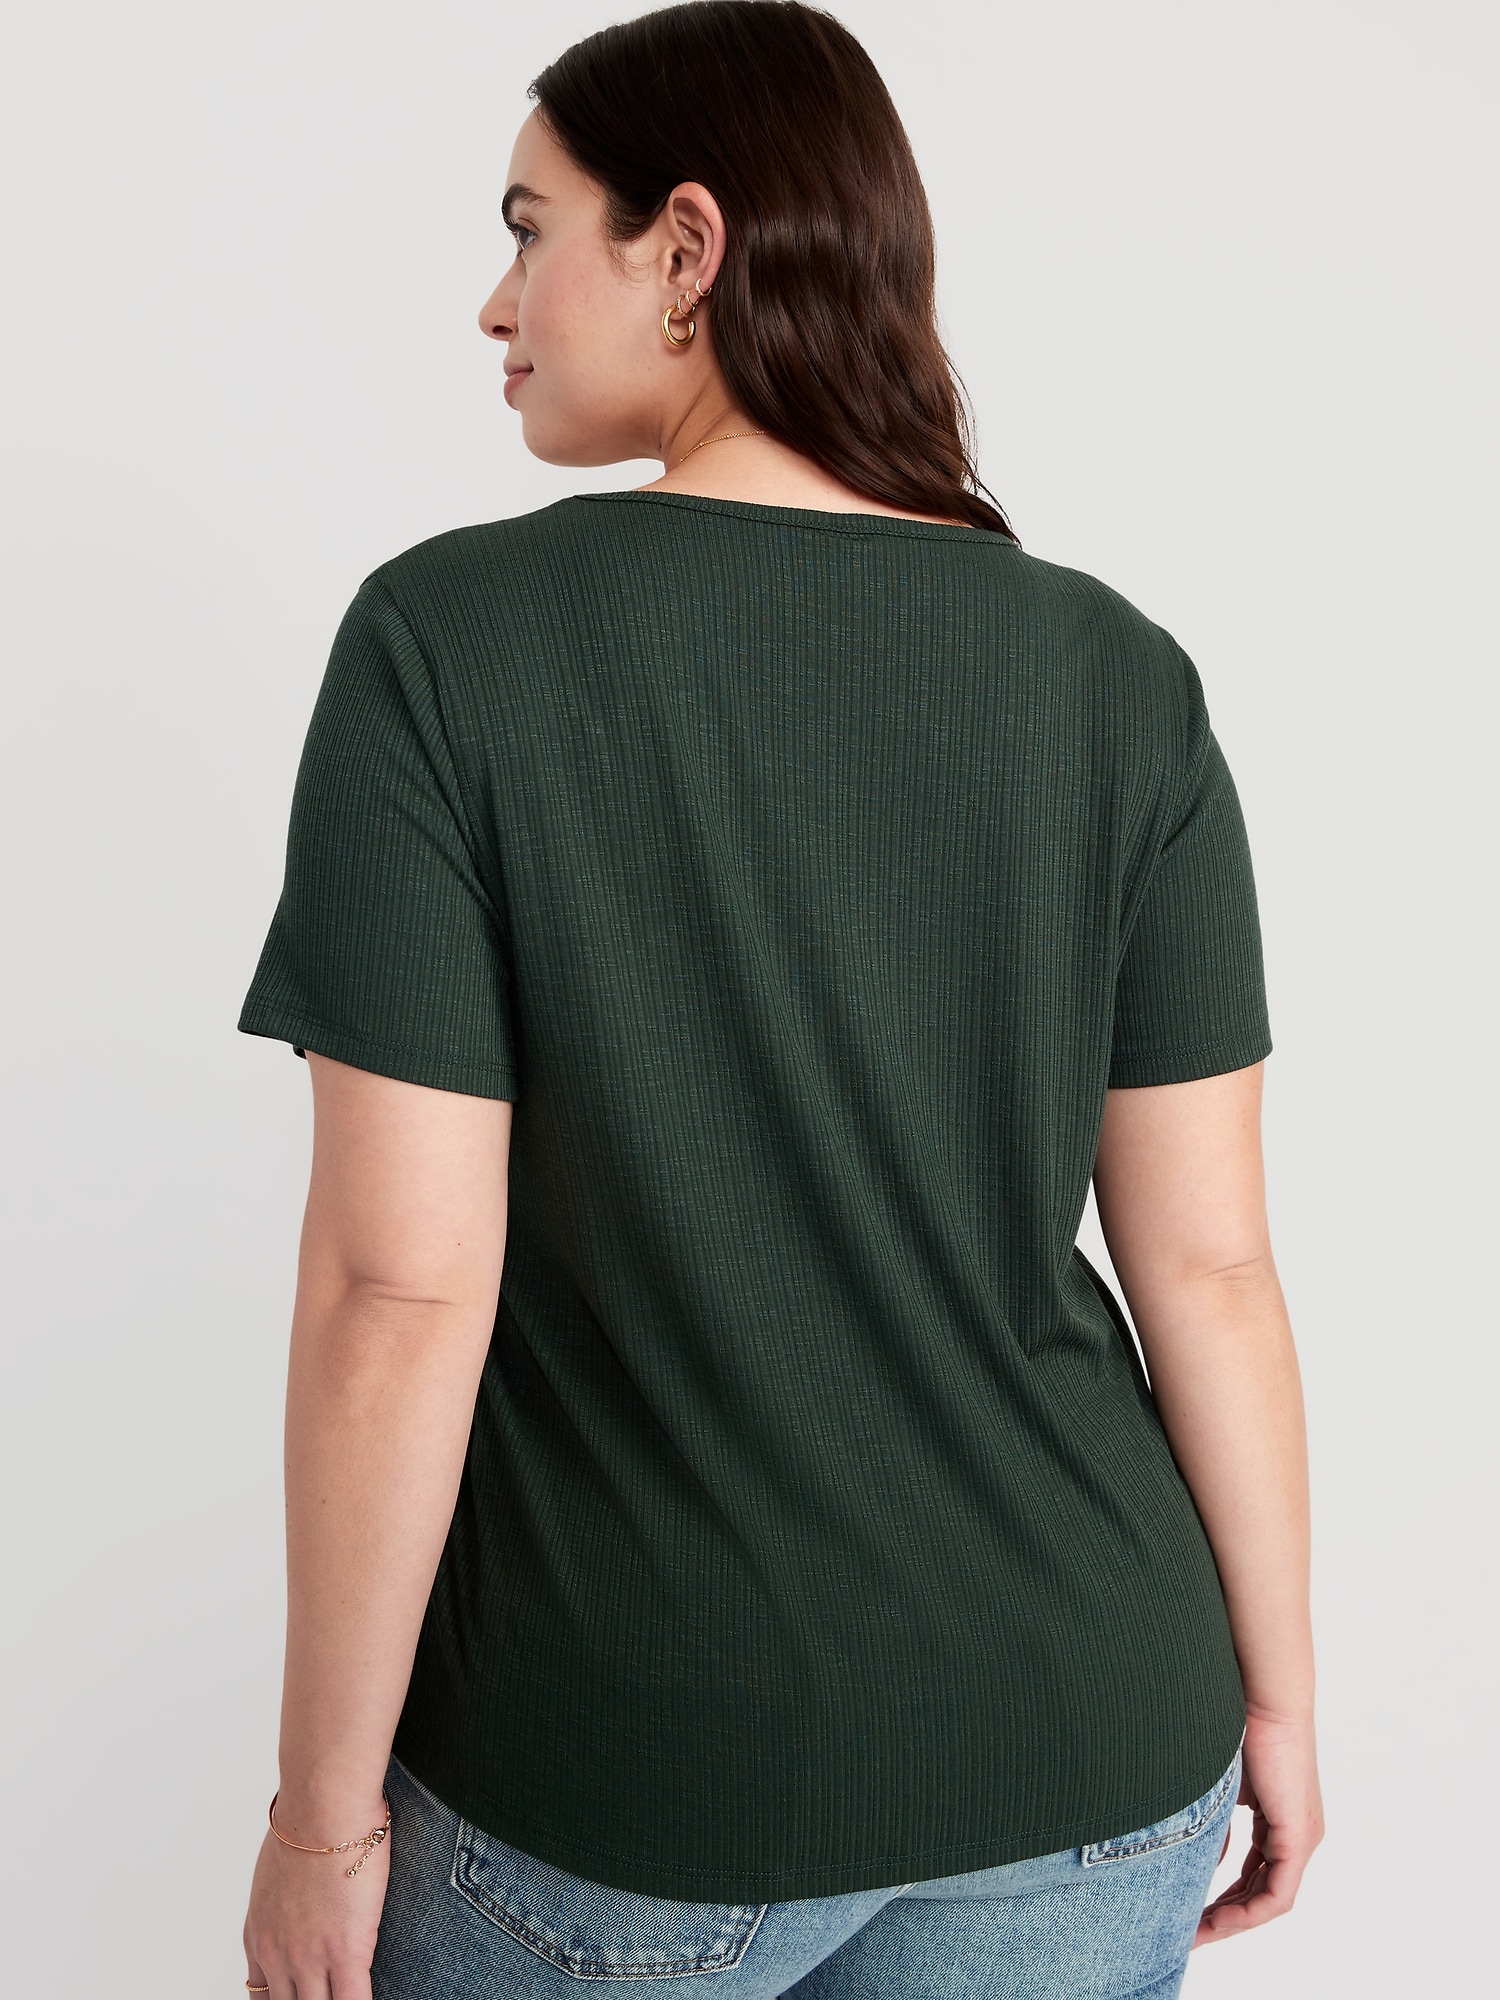 Slub-Knit Old | V-Neck Ribbed for Navy Women Luxe T-Shirt